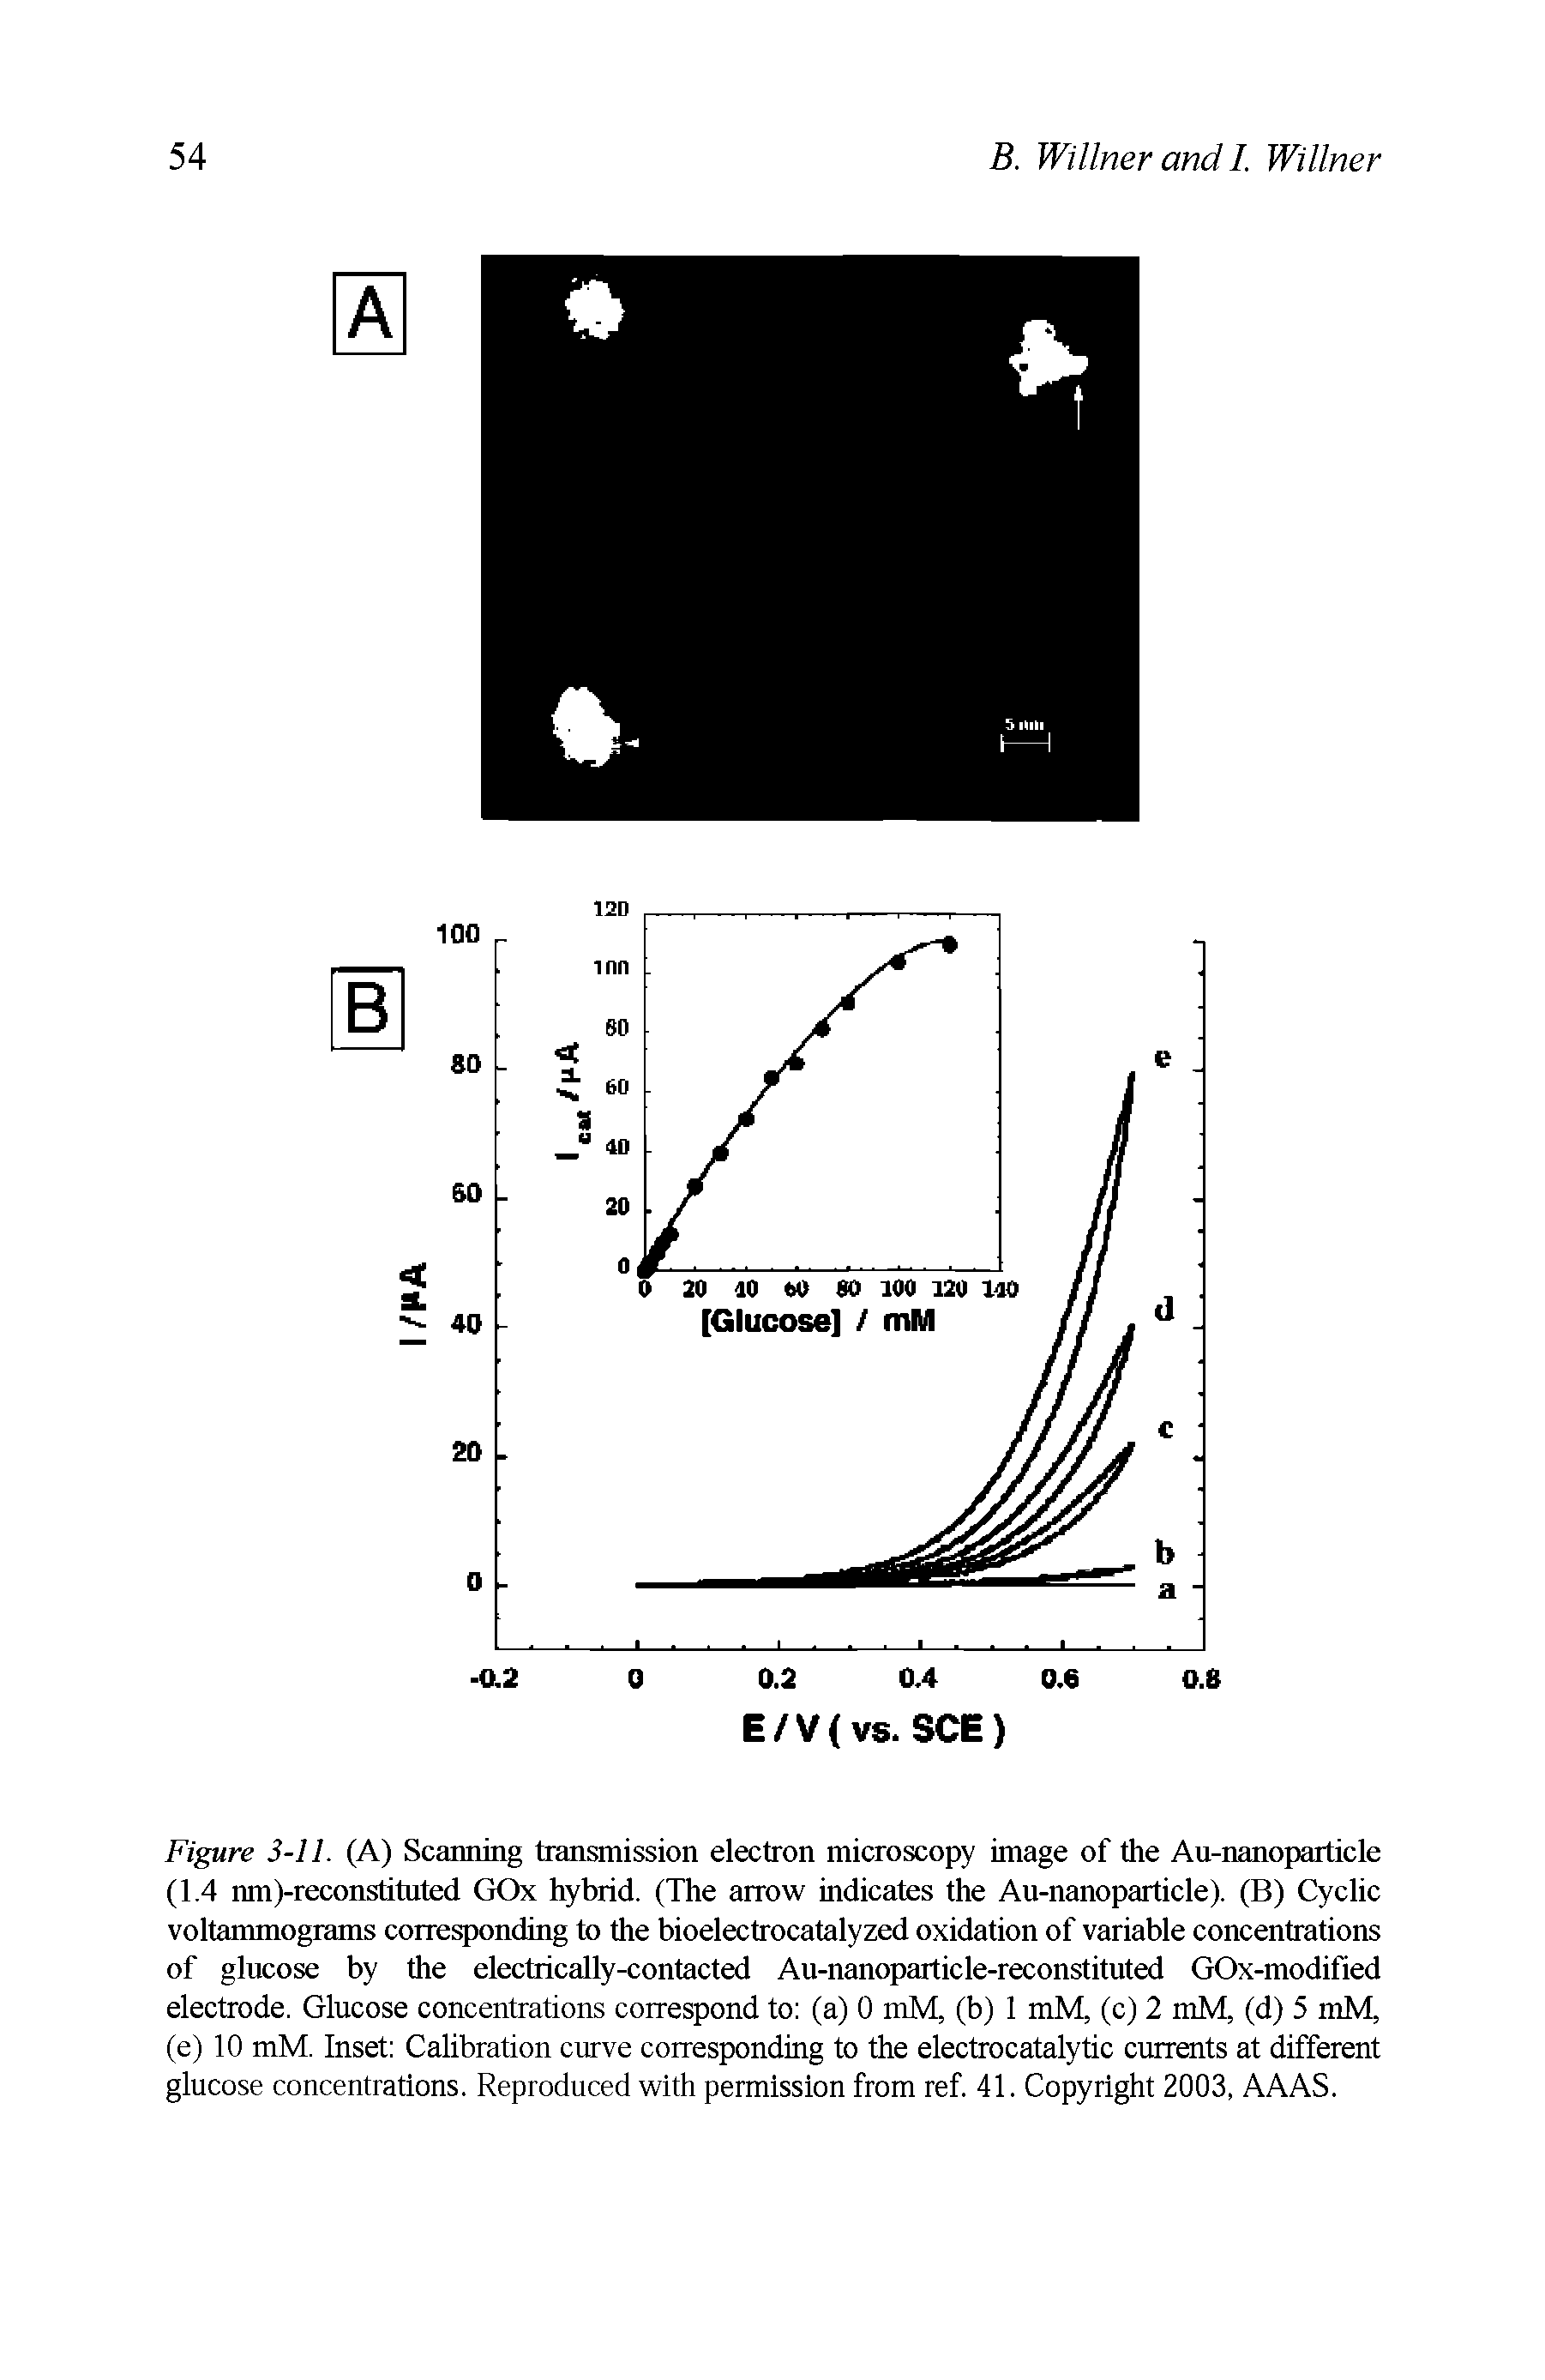 Figure 3-11. (A) Scanning transmission electron microscopy image of tlie Au-nanoparticle (1.4 nm (-reconstituted GOx hybrid. (The arrow indicates the Au-nanoparticle). (B) Cyclic voltammograms corresponding to the bioelectrocatalyzed oxidation of variable concentrations of glucose by tire electrically-contacted Au-nanoparticle-reconstituted GOx-modified electrode. Glucose concentrations correspond to (a) 0 mM, (b) 1 mM, (c) 2 mM, (d) 5 mM, (e) 10 mM. Inset Calibration curve corresponding to the electrocatalytic currents at different glucose concentrations. Reproduced with permission from ref. 41. Copyright 2003, AAAS.